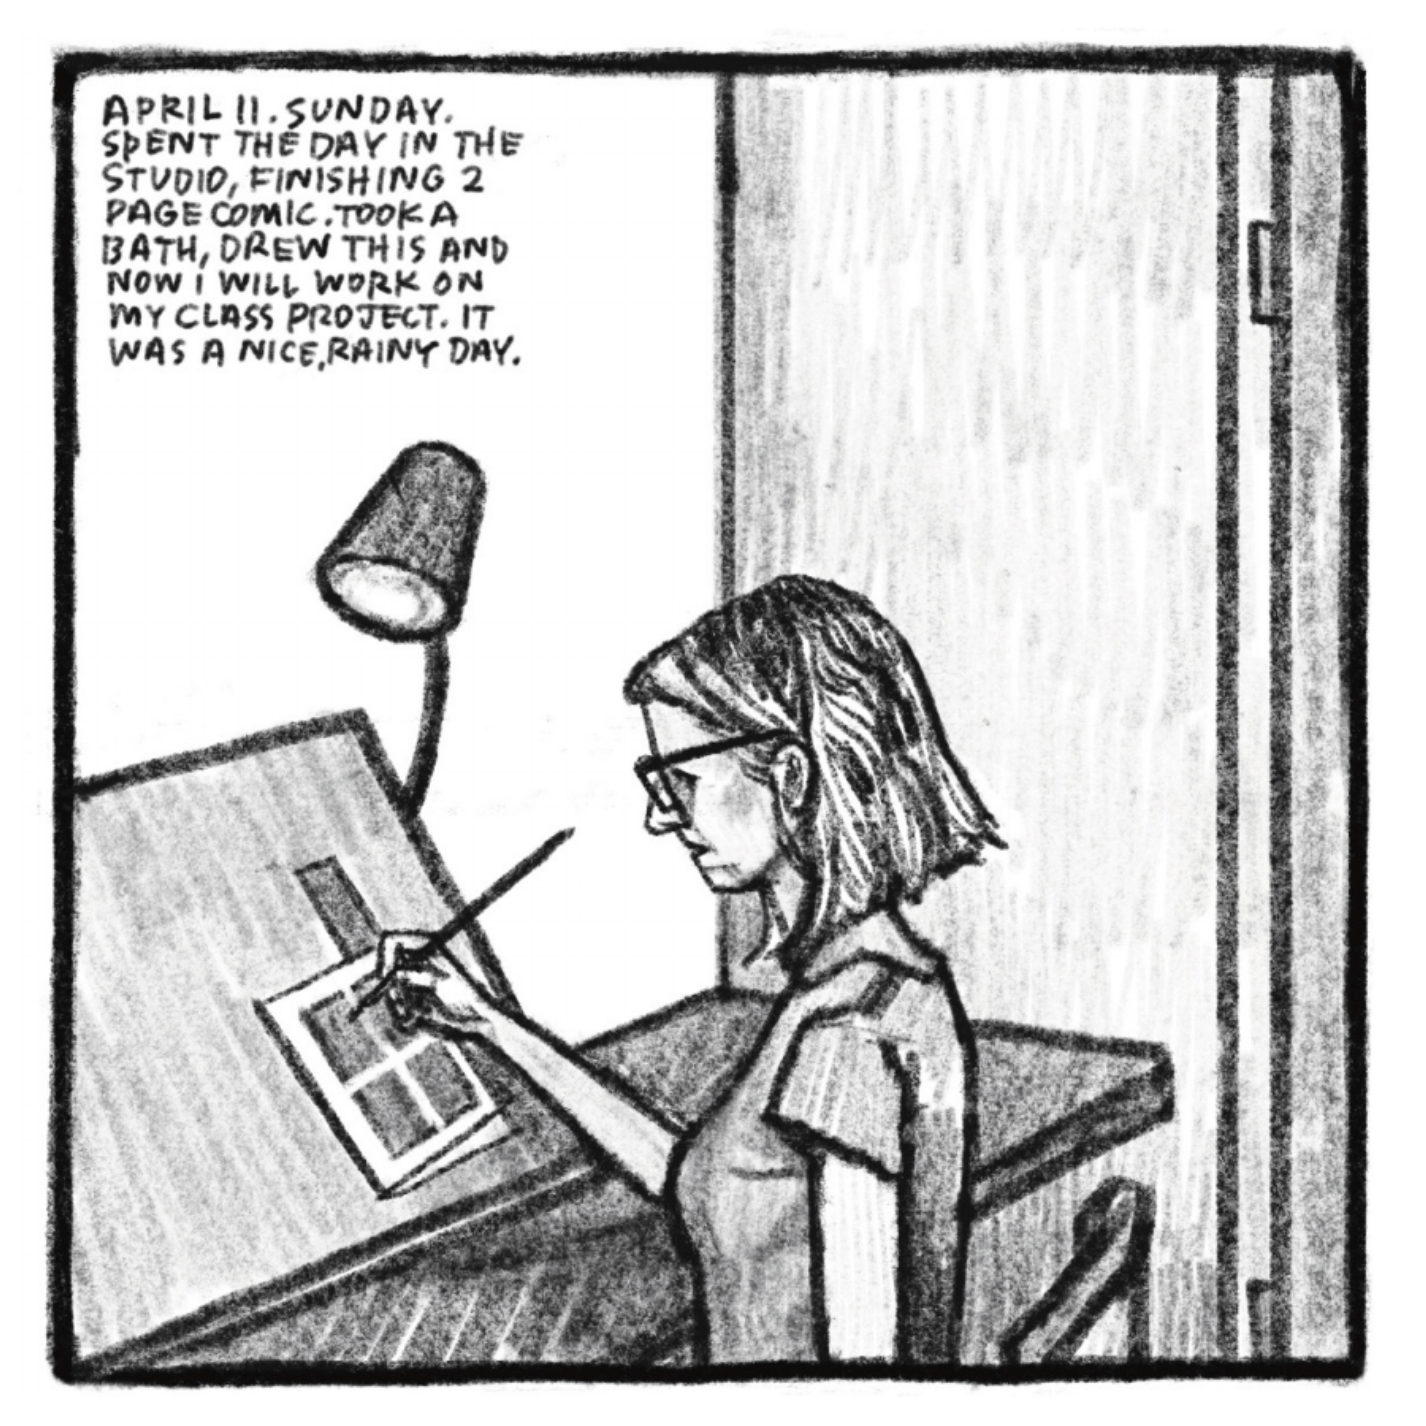 Kim sits at a drafting table, inking a four panel comic. She is wearing glasses and a short-sleeved shirt. 
"April 11. Sunday. Spent the day in the studio, finishing 2 page comic. Took a bath, drew this and now I will work on my class project. It was a nice rainy day."